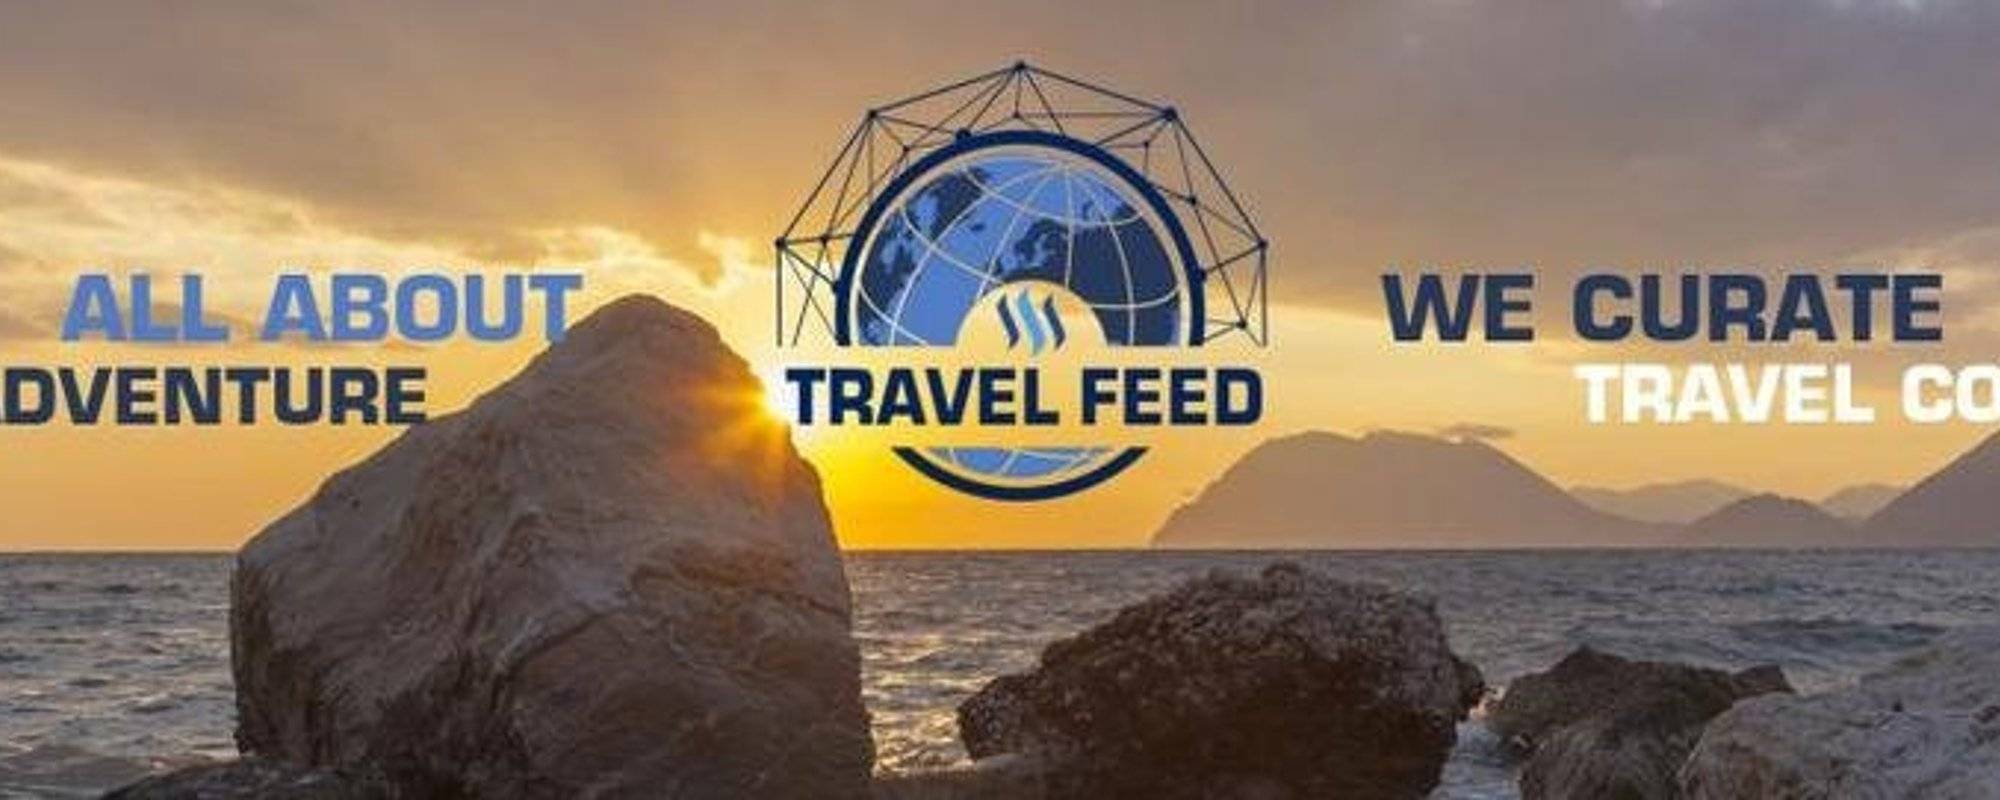 Travel Advice - Weekly Round-Up #60